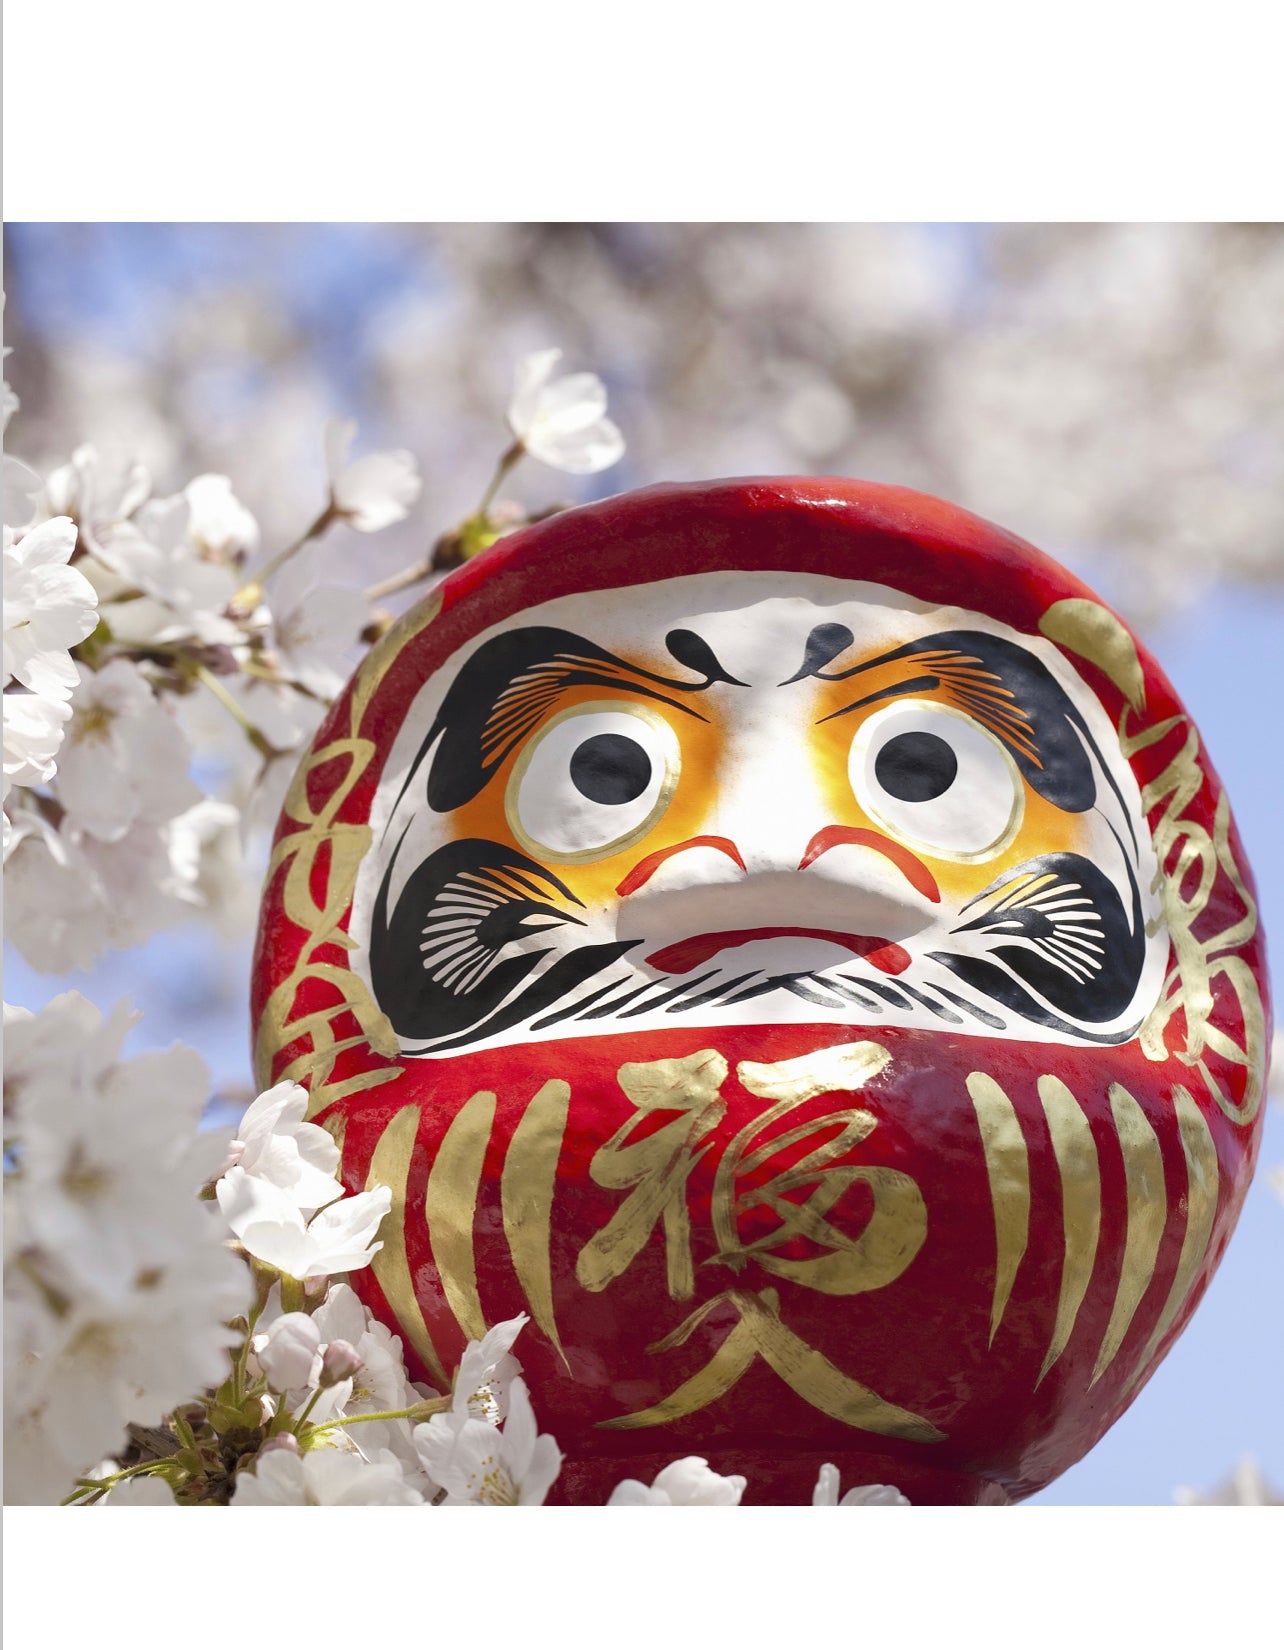 The History and Meaning Behind Japanese Daruma Dolls